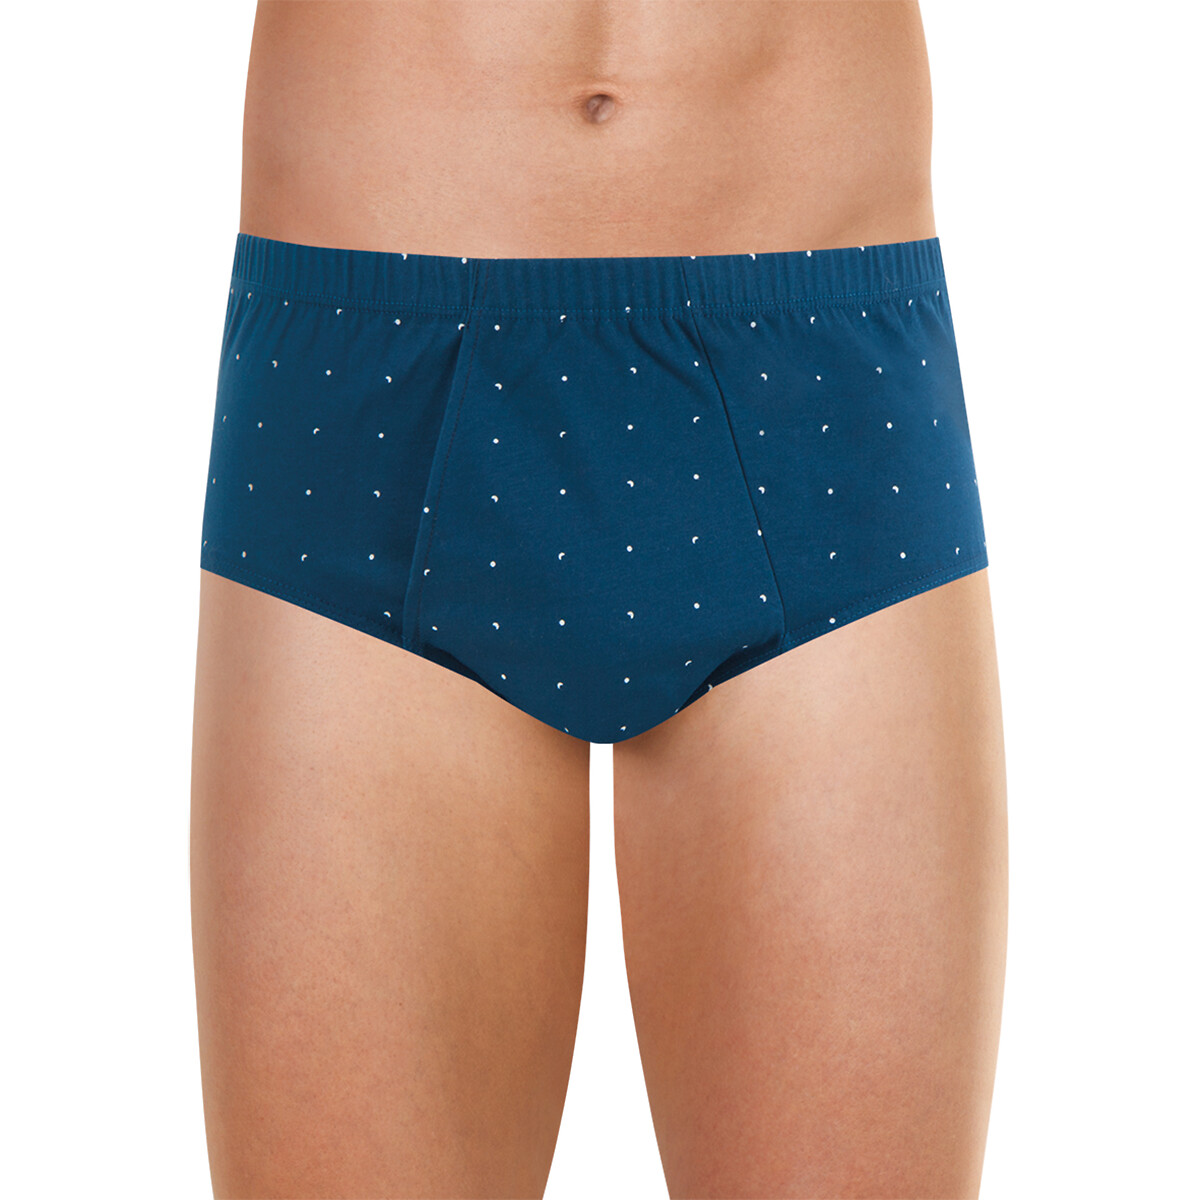 Image of Printed Cotton Briefs with High Waist and Pocket